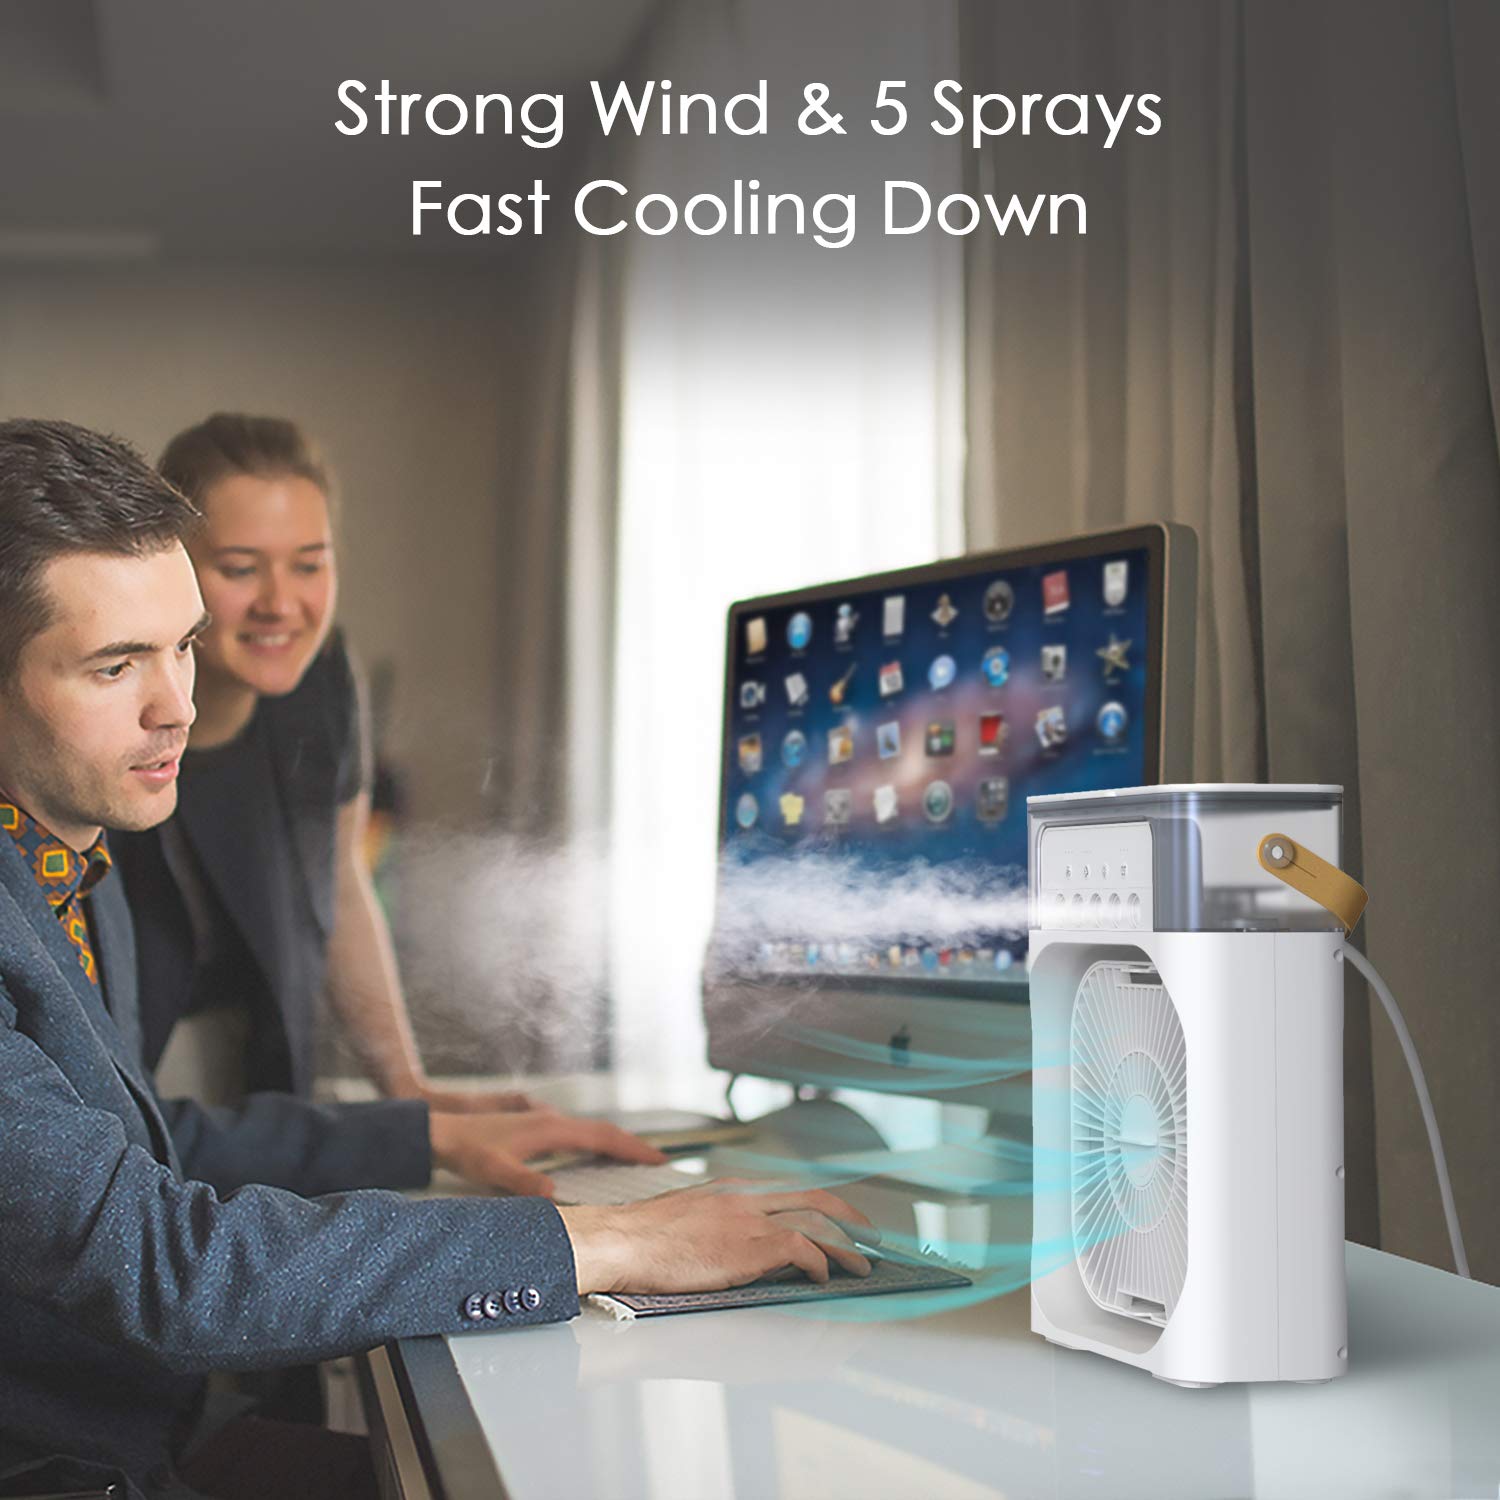 NTMY Portable Air Conditioner Fan, Mini Evaporative Air Cooler with 7 Colors LED Light, 1/2/3 H Timer, 3 Wind Speeds and 3 Spray Modes for Your Desk, Nightstand, or Coffee Table